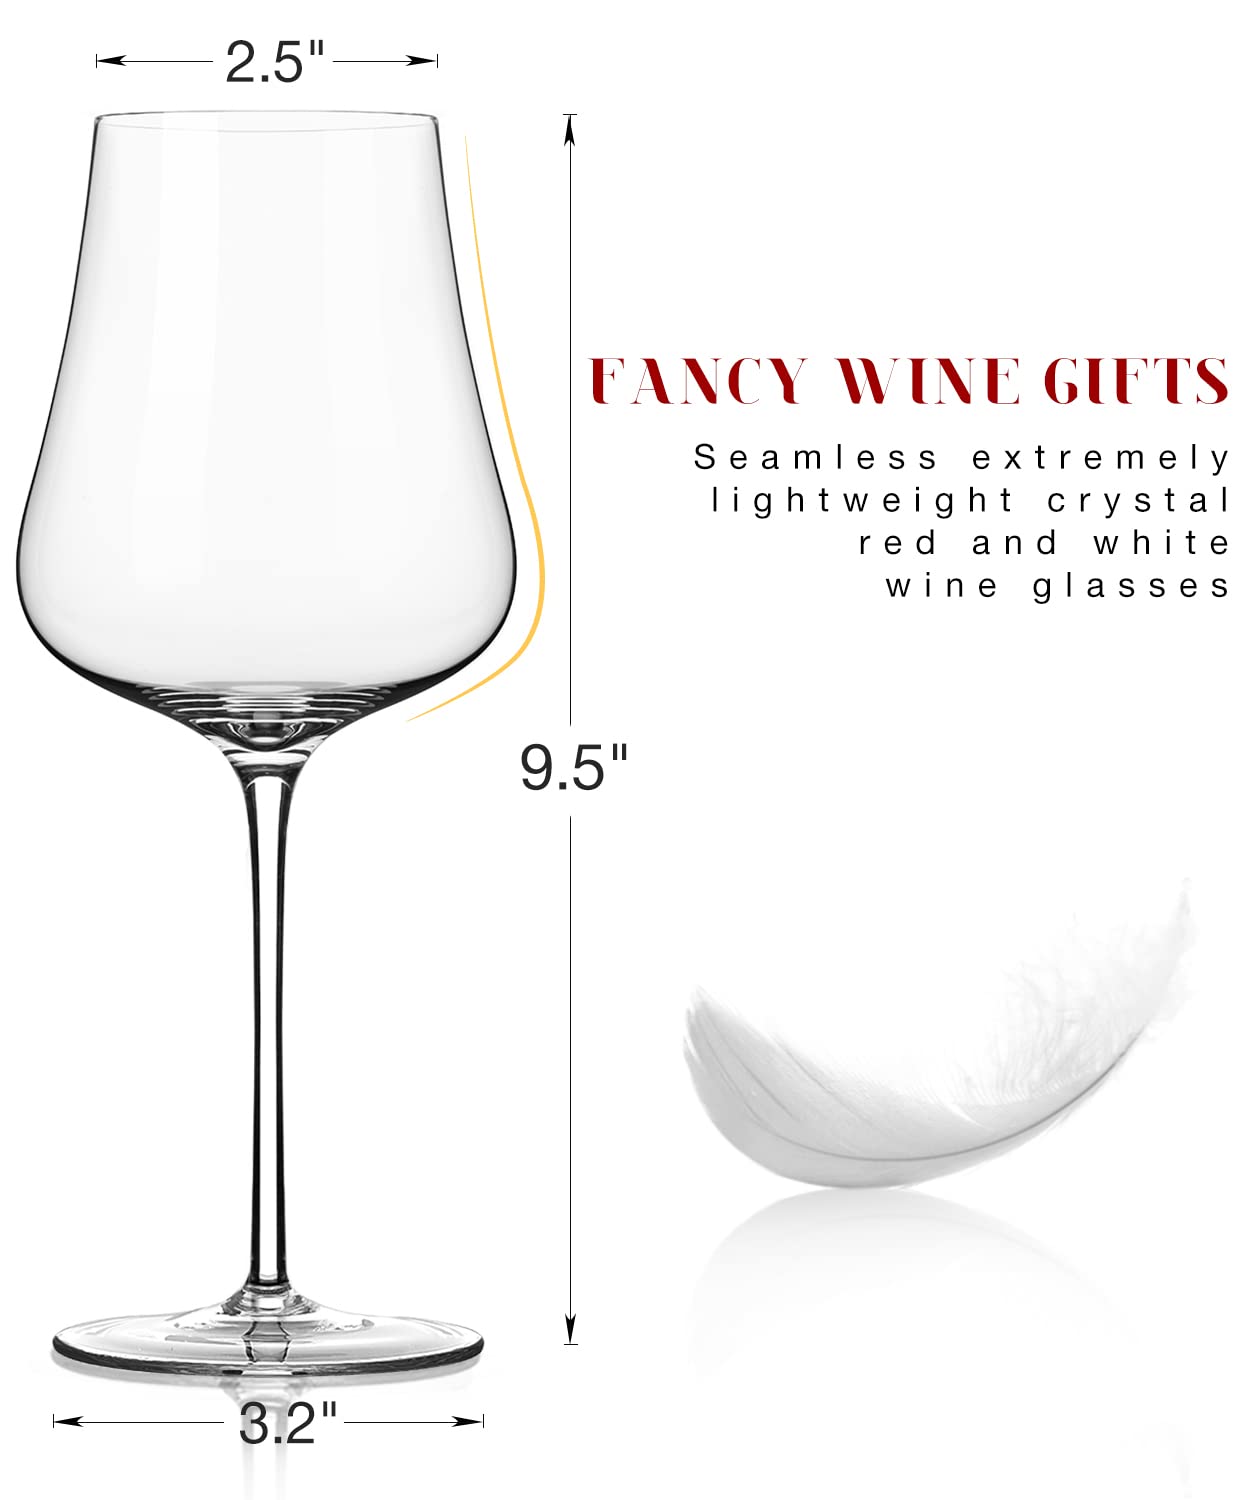 LUNA & MANTHA Modren Red Wine Glasses- Hand Blown Full Bottle Crystal White and Red Wine Glasses, Thin Rim & Long Stem, Perfect for Cabernet, Pinot Noir, Burgundy, Bordeaux- 18 Oz, Clear